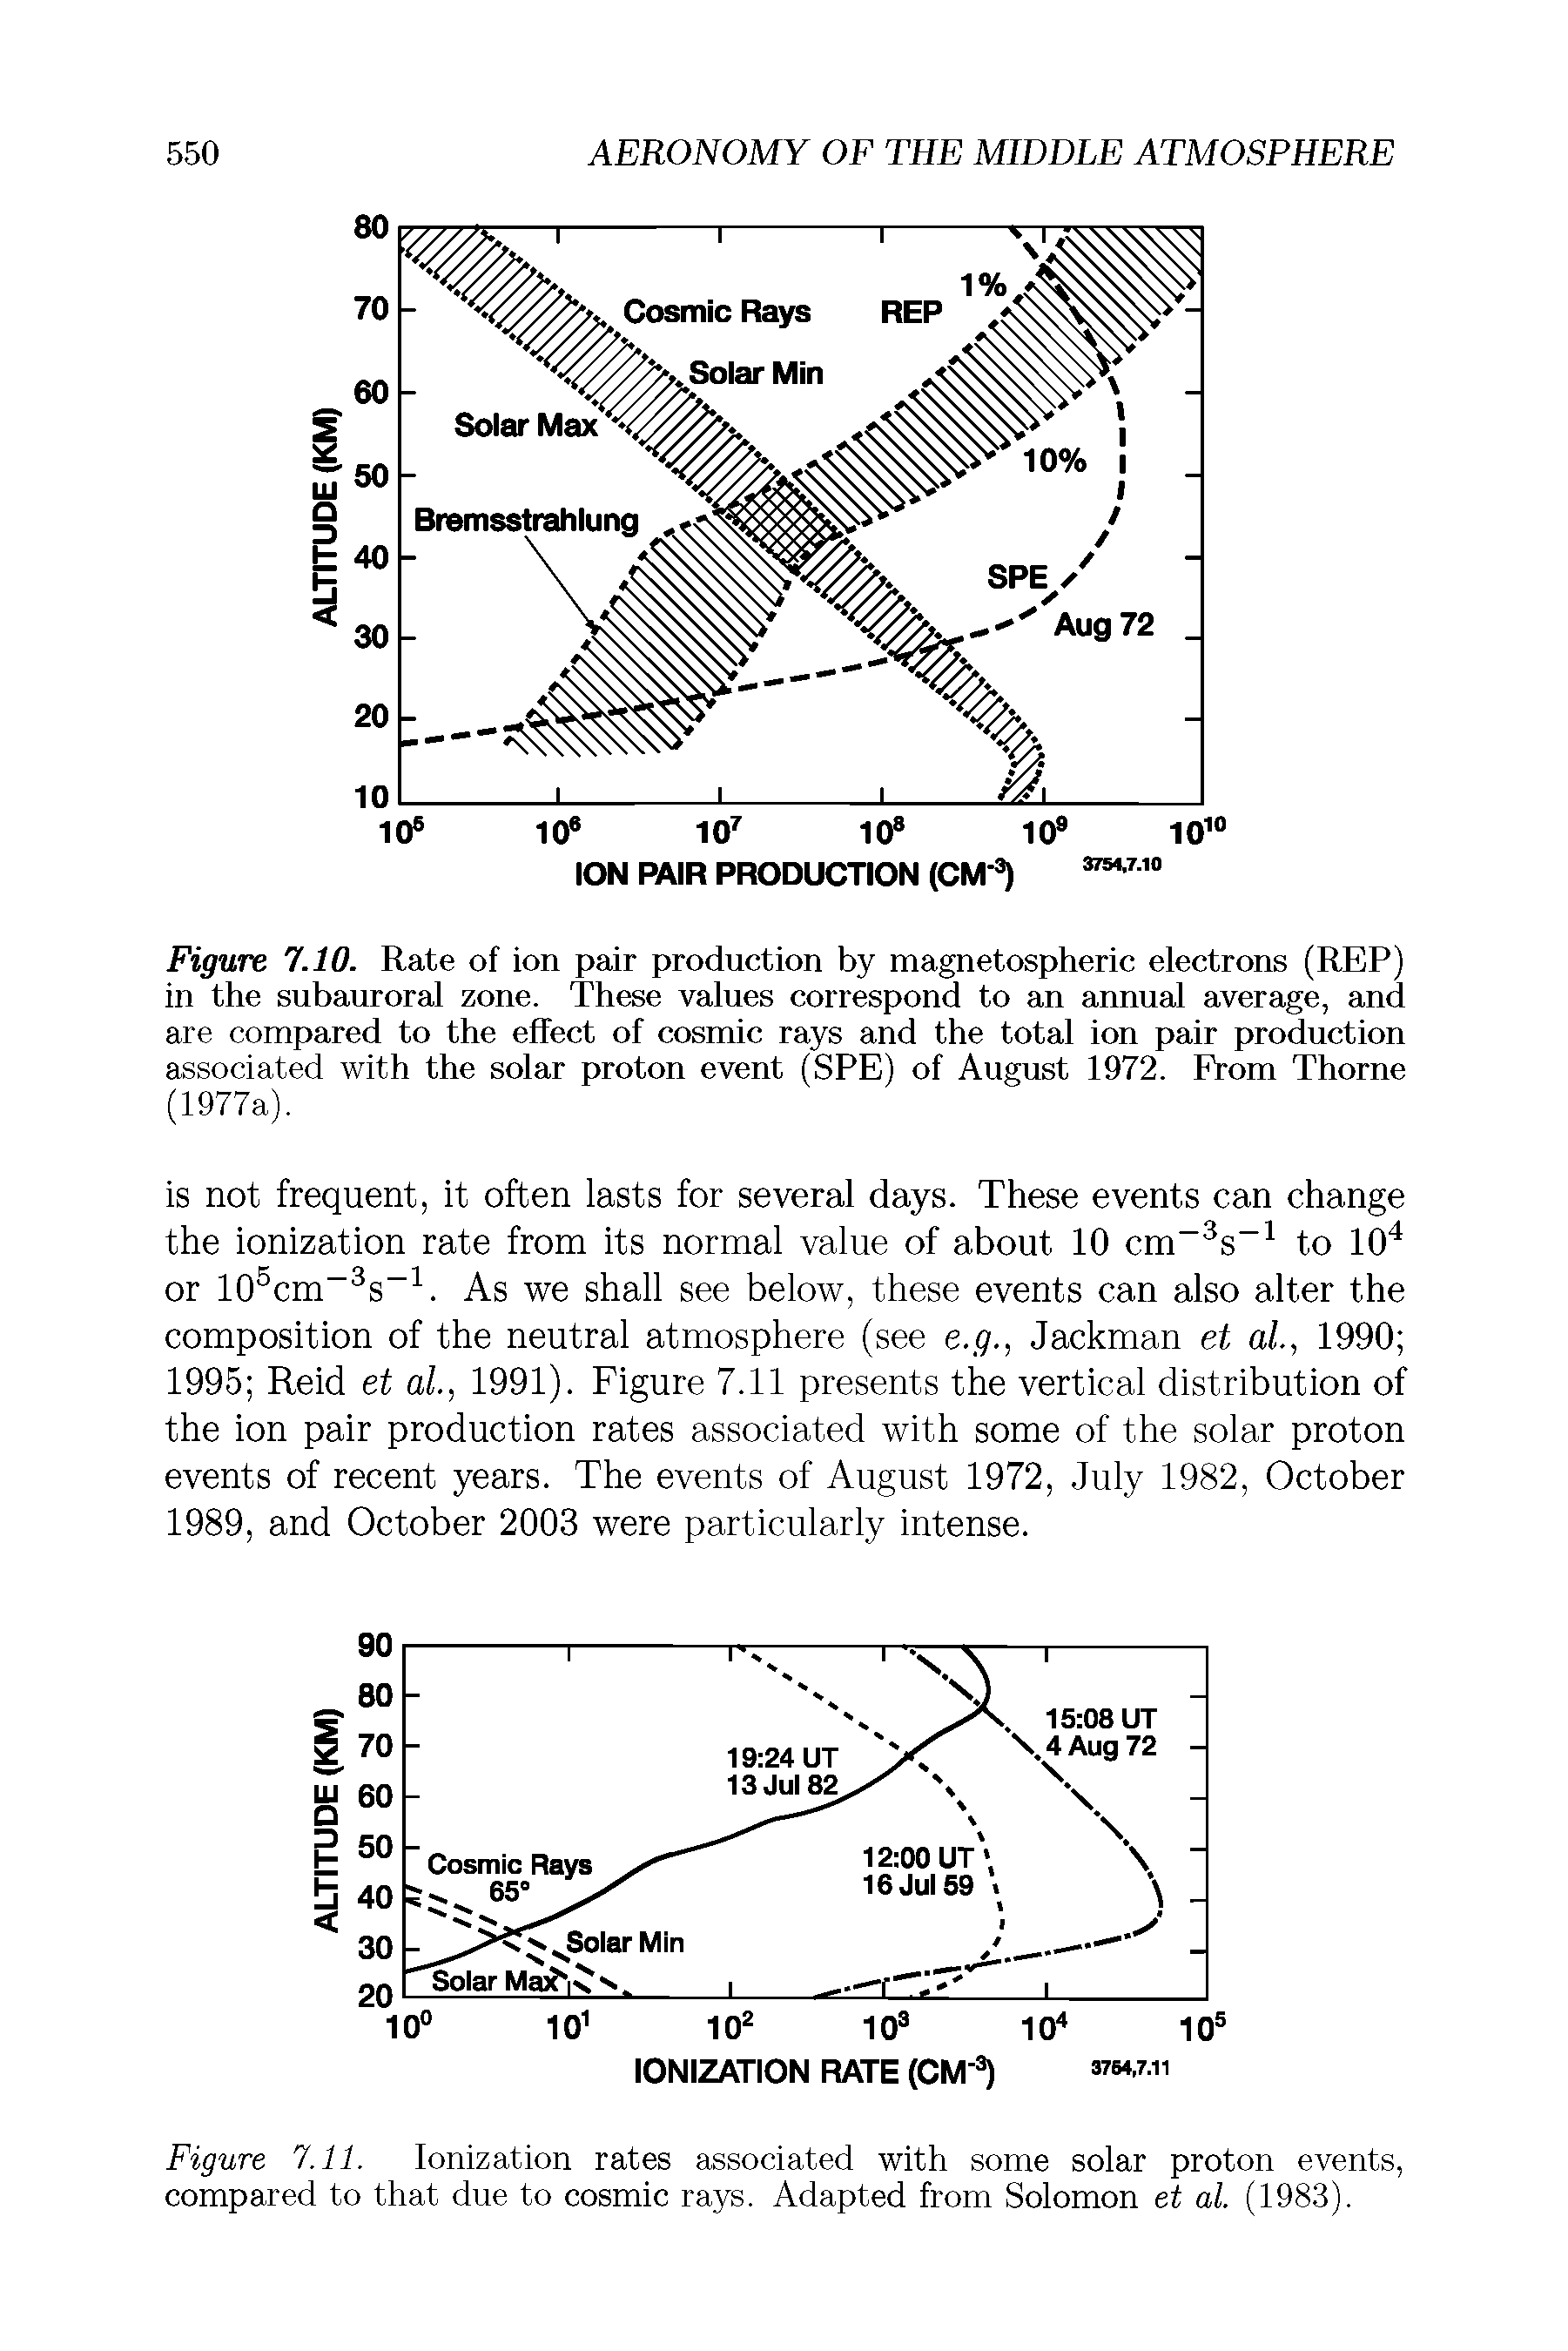 Figure 7.11. Ionization rates associated with some solar proton events, compared to that due to cosmic rays. Adapted from Solomon et al. (1983).